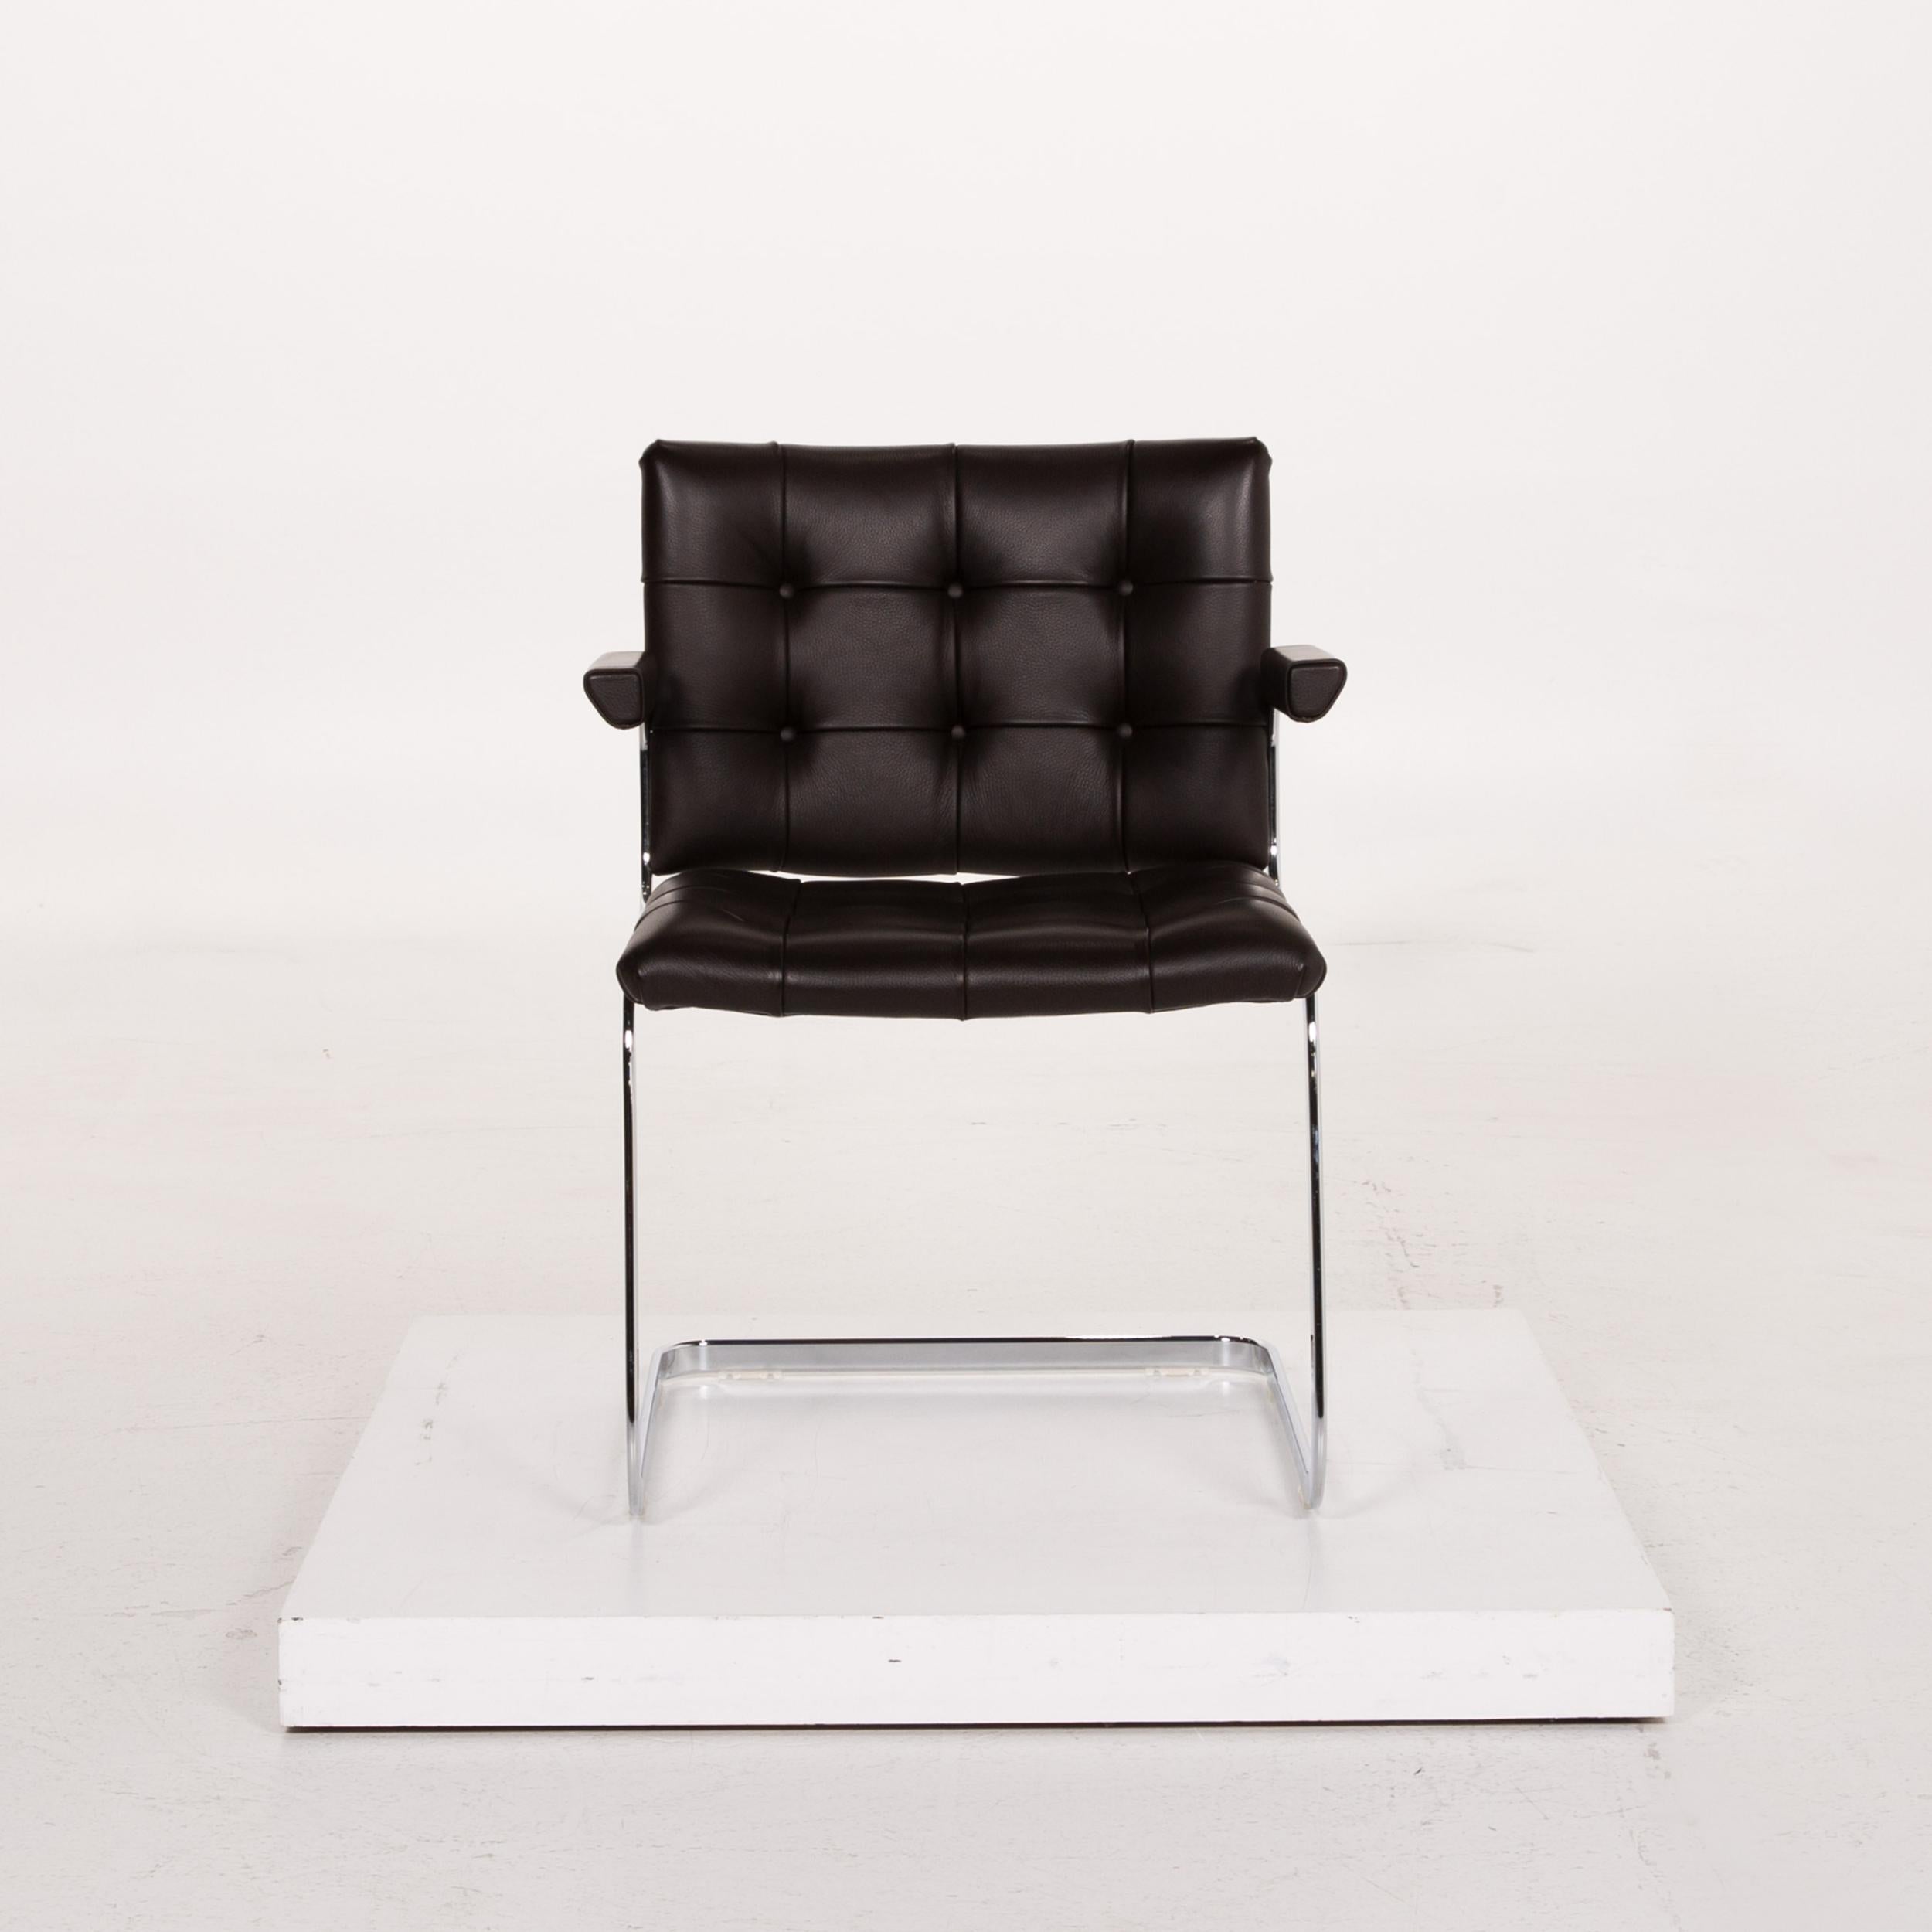 De Sede RH 305 Leather Armchair Dark Brown Chair In Excellent Condition For Sale In Cologne, DE